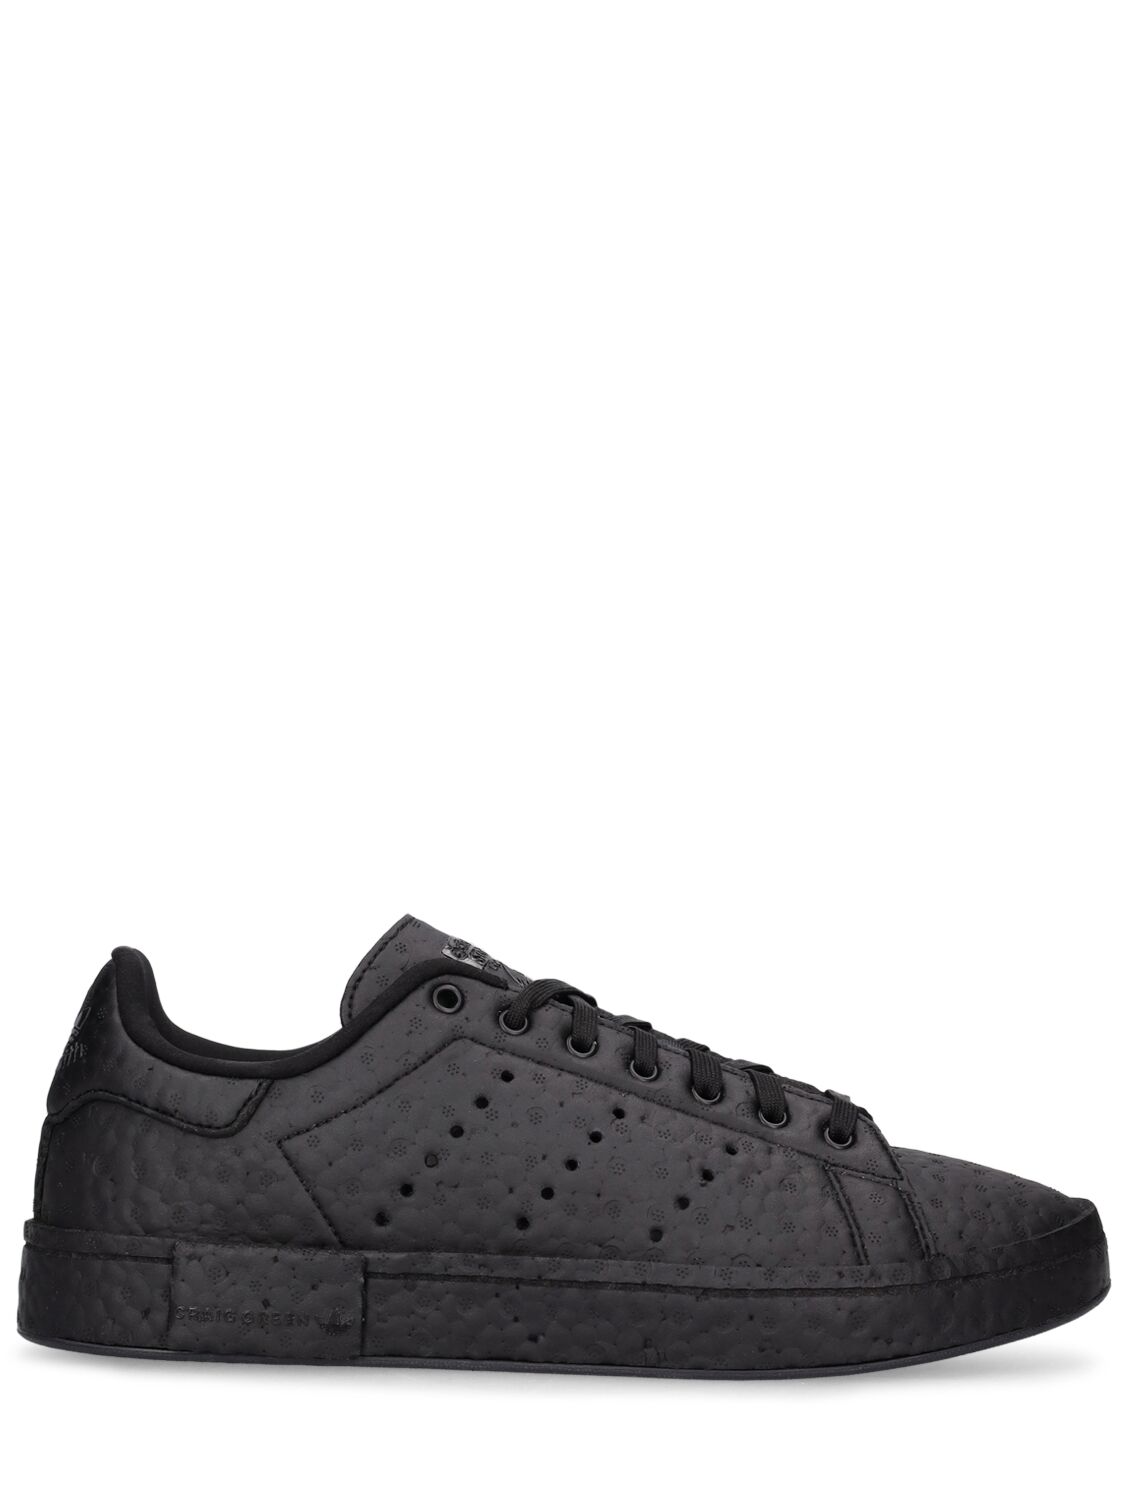 Image of Craig Green Stan Smith Sneakers